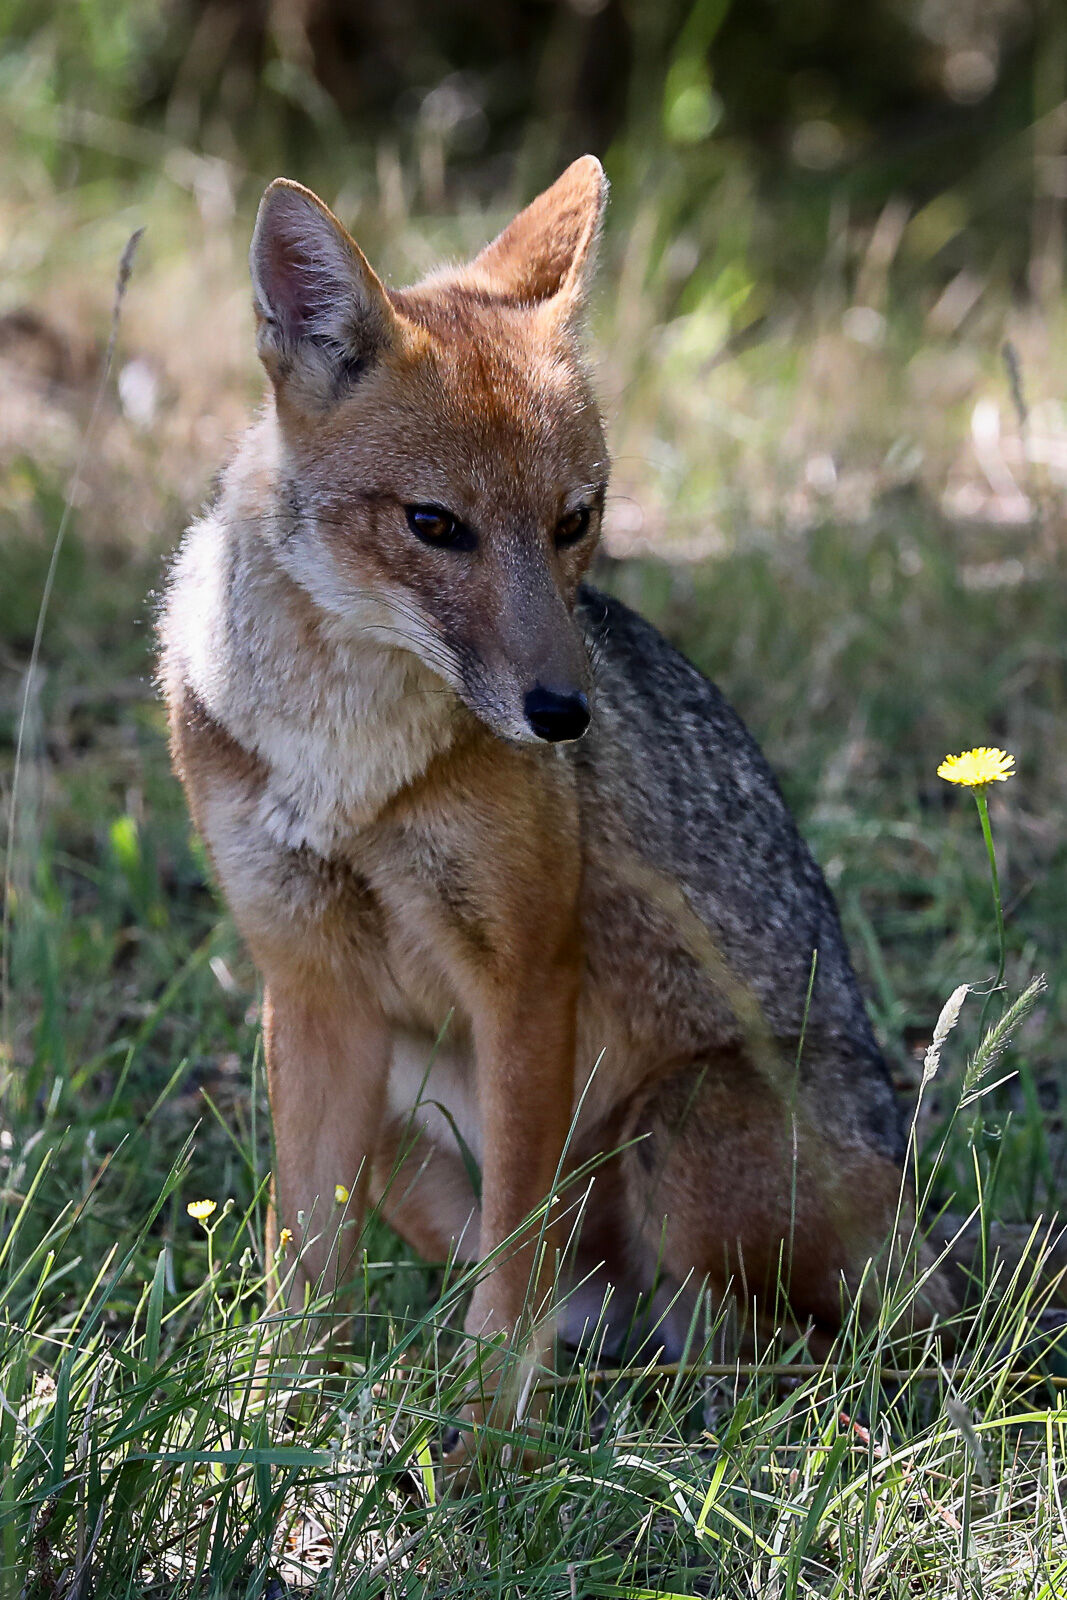 Patagonian Fox rests near our lunch spot along the Chimehuin River hoping for scraps.